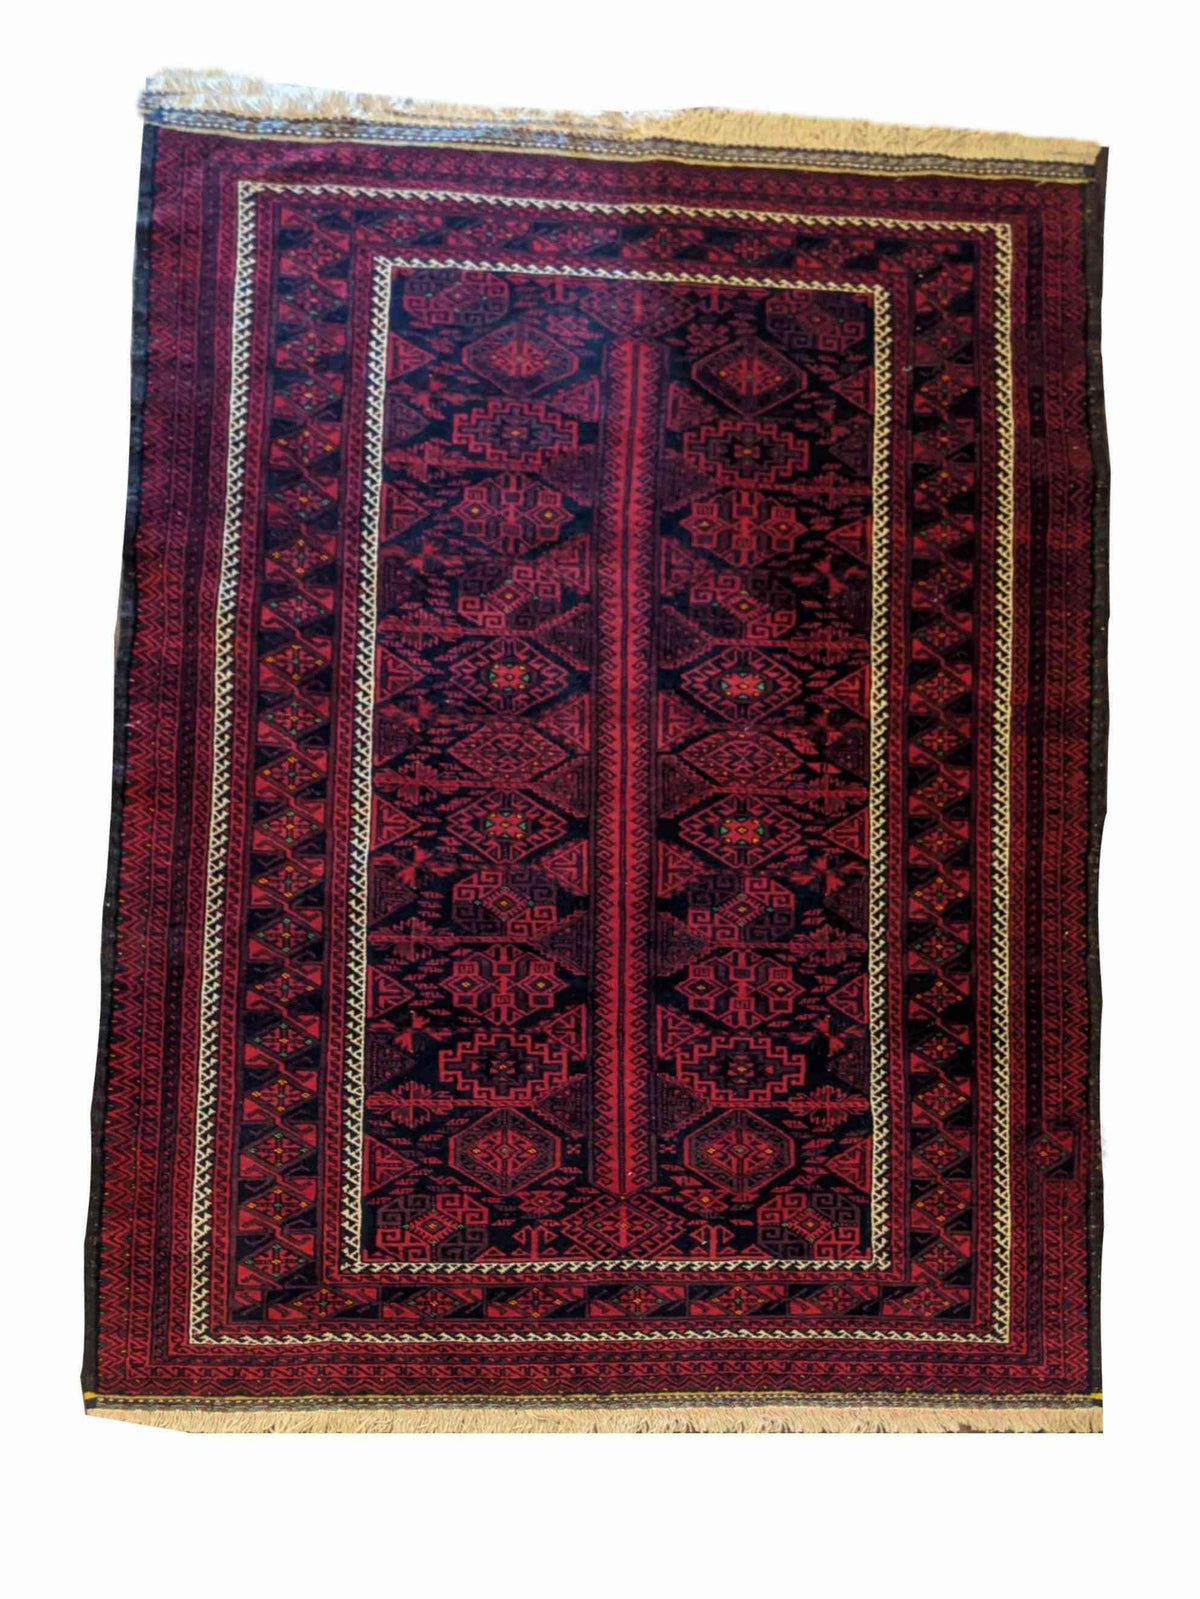 196 x 136 cm Fine Persian Red Baluch Geometric Red Rug - Rugmaster